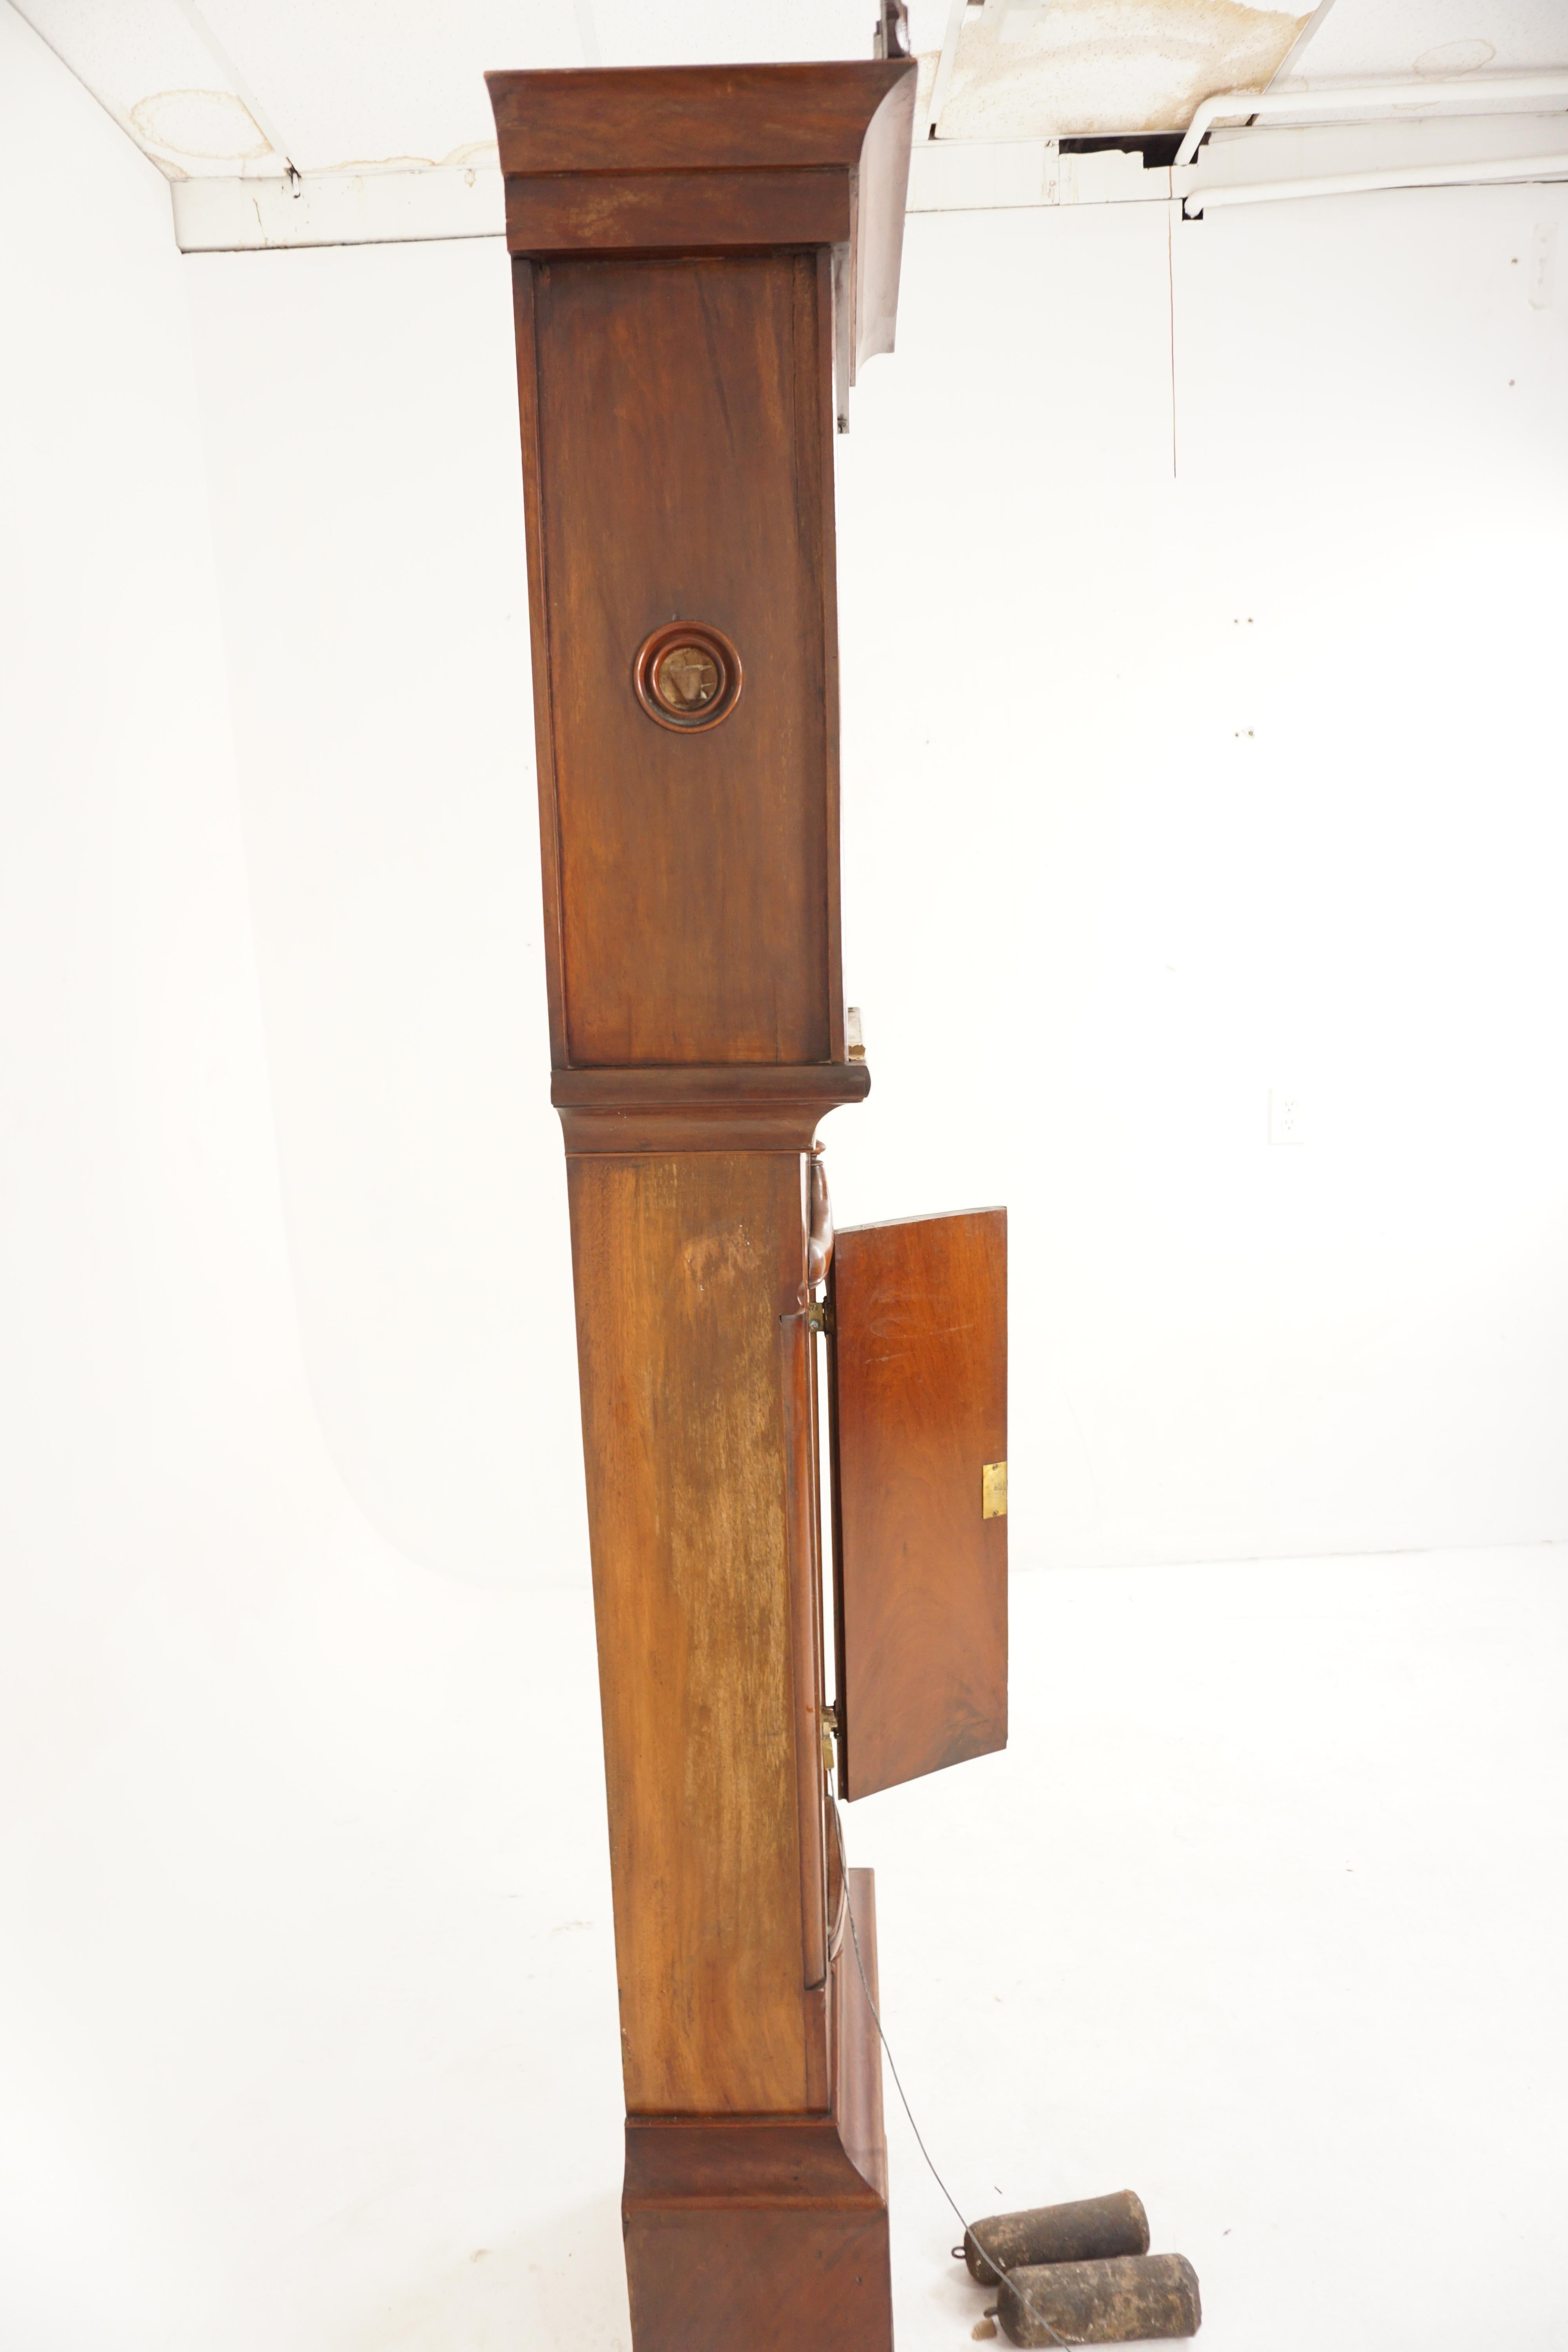 Vic. Grandfather Long Case Clock by Jas Huston of Johnstone, Scotland 1870 H182 6